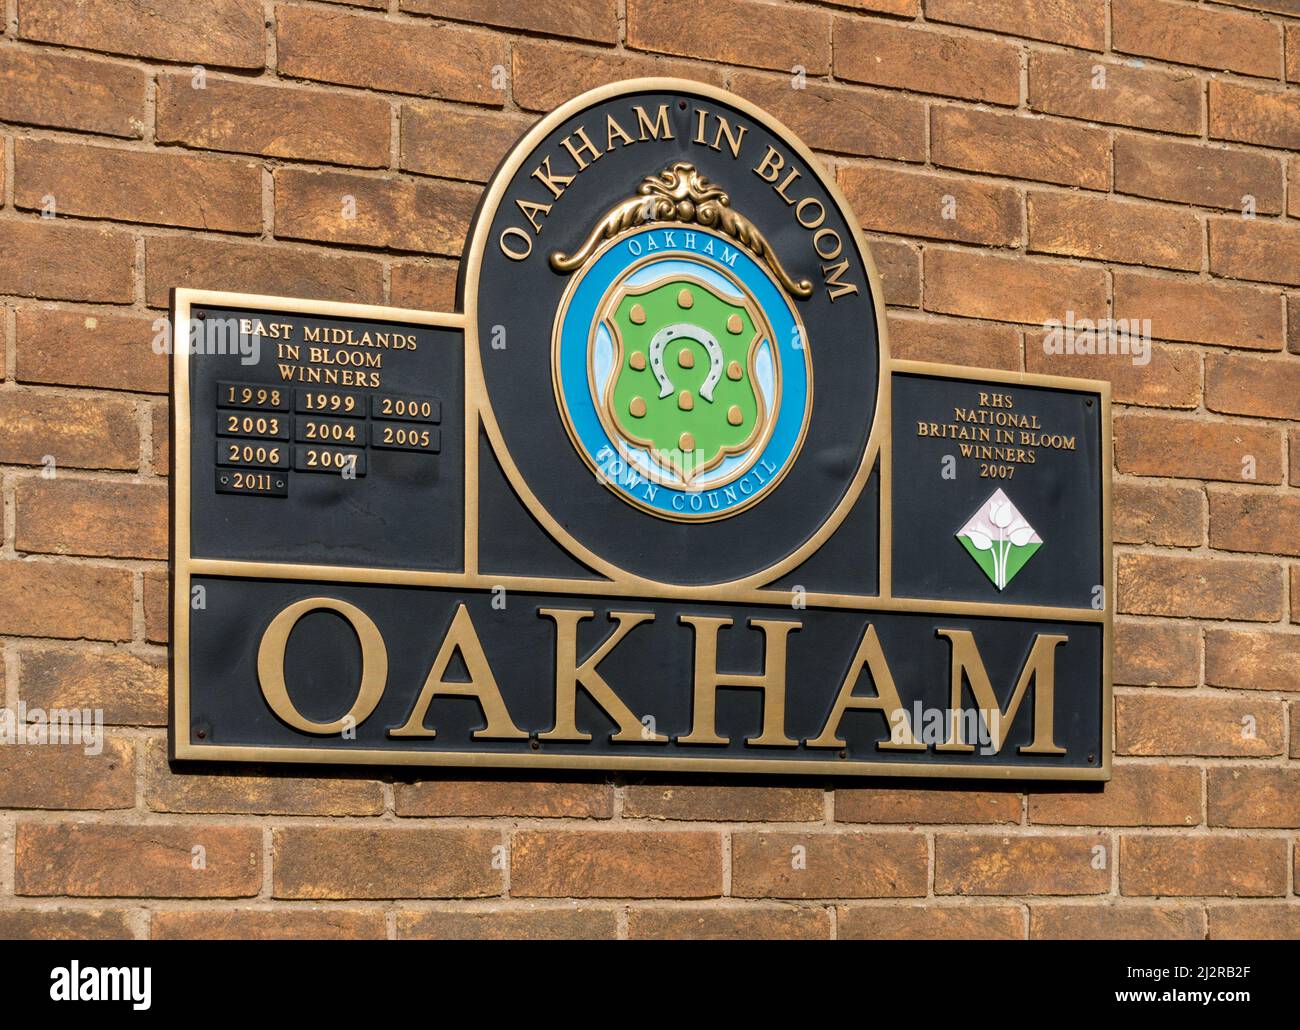 Wall plaque celebrating Oakham in Bloom successes in East Midlands in Bloom & RHS National Britain in Bloom Awards contests, Oakham, Rutland, England Stock Photo